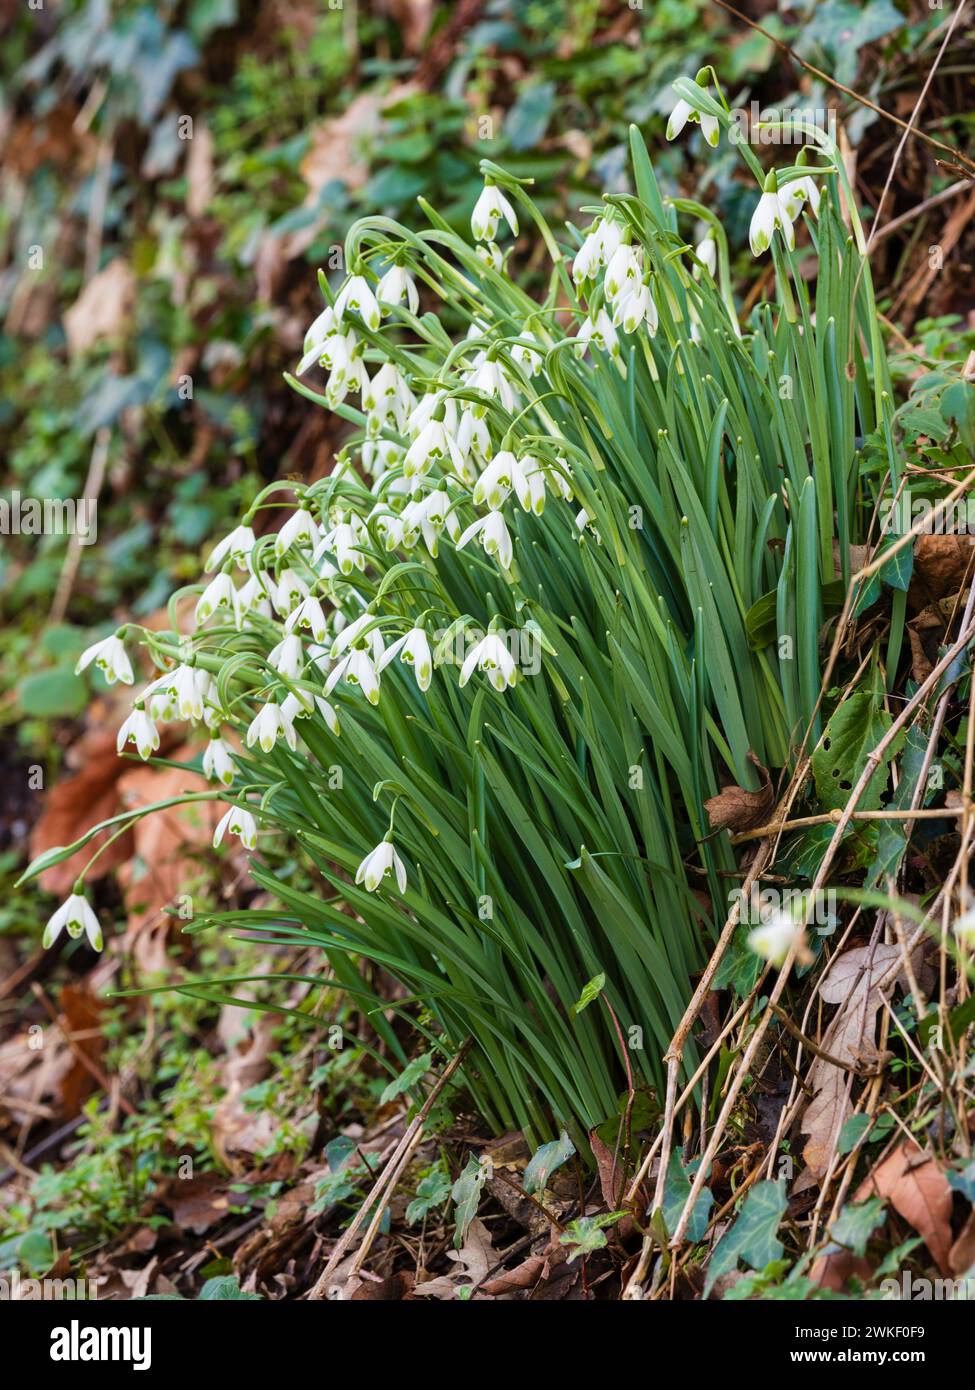 Clump of the green tipped flowers of the common snowdrop variety Galanthus nivalis 'Viridapice' in late Winter Stock Photo